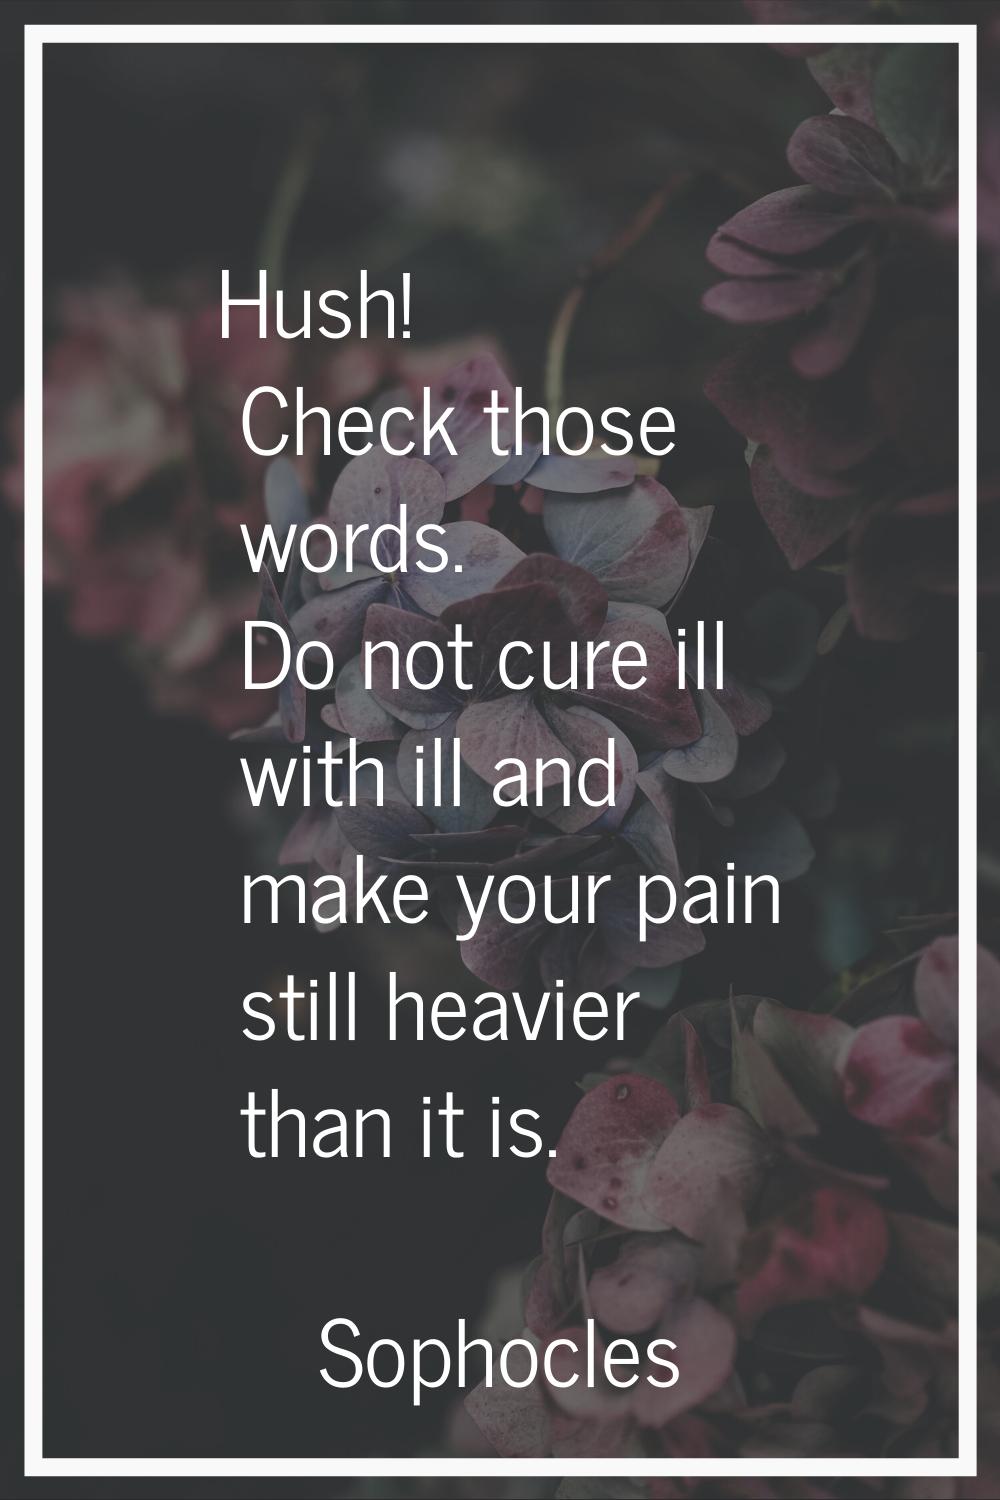 Hush! Check those words. Do not cure ill with ill and make your pain still heavier than it is.